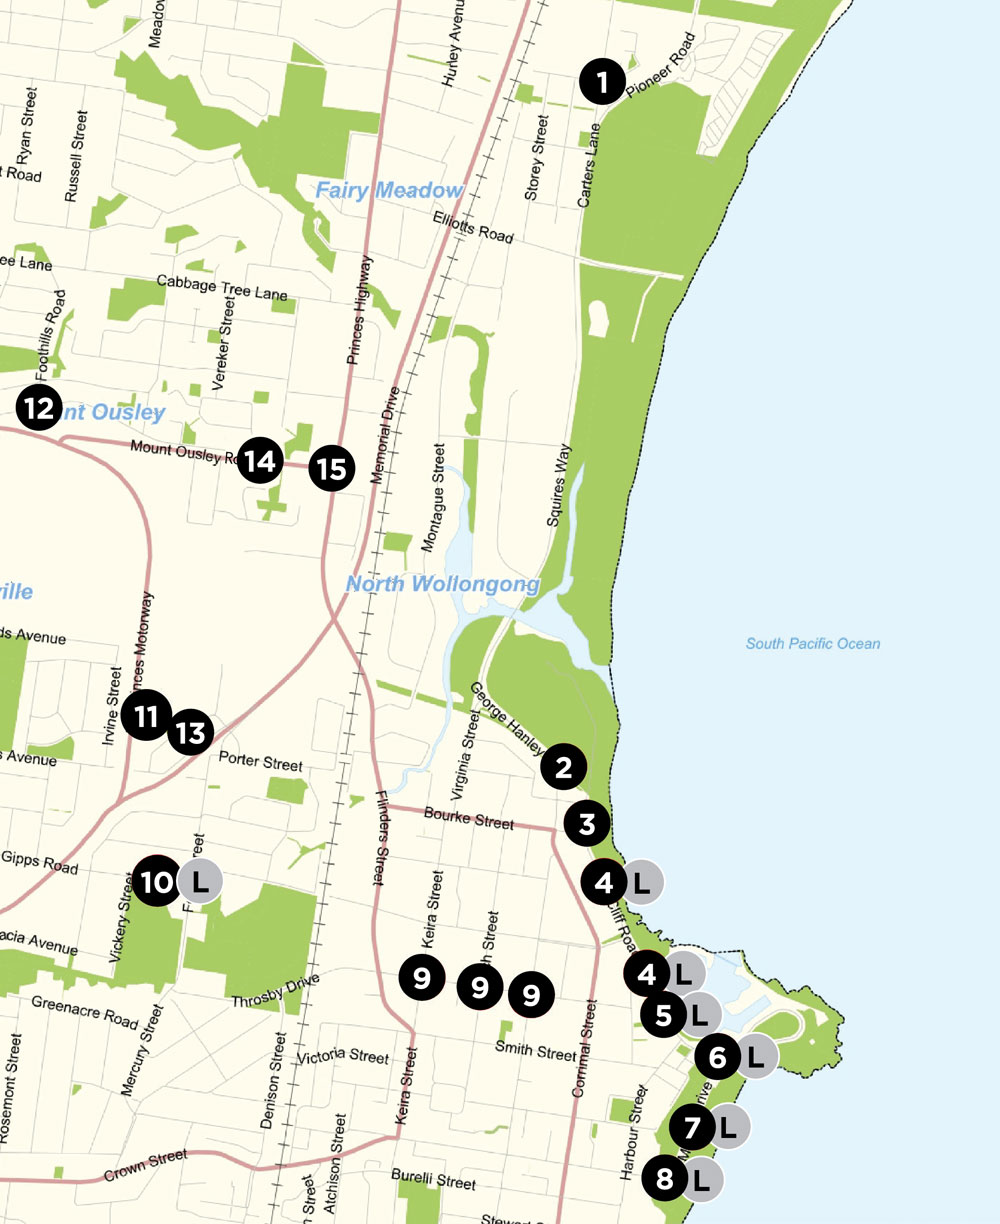 Map of key road works locations for UCI